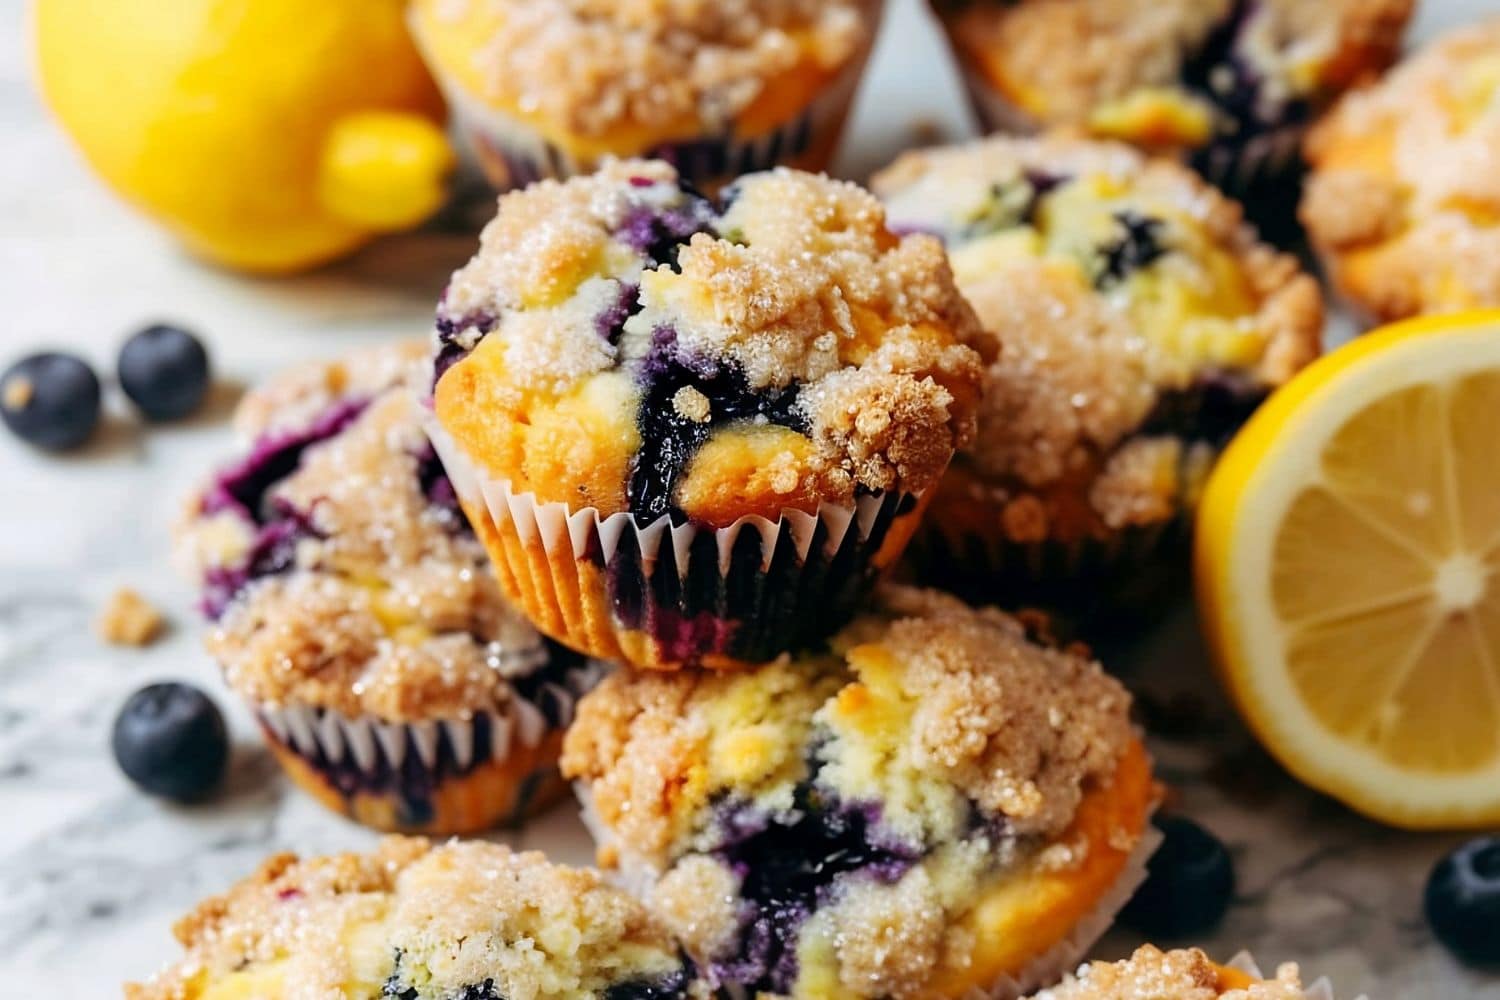 Pile of Lemon Blueberry Muffins on a White Marble Table with Lemons and Blueberries